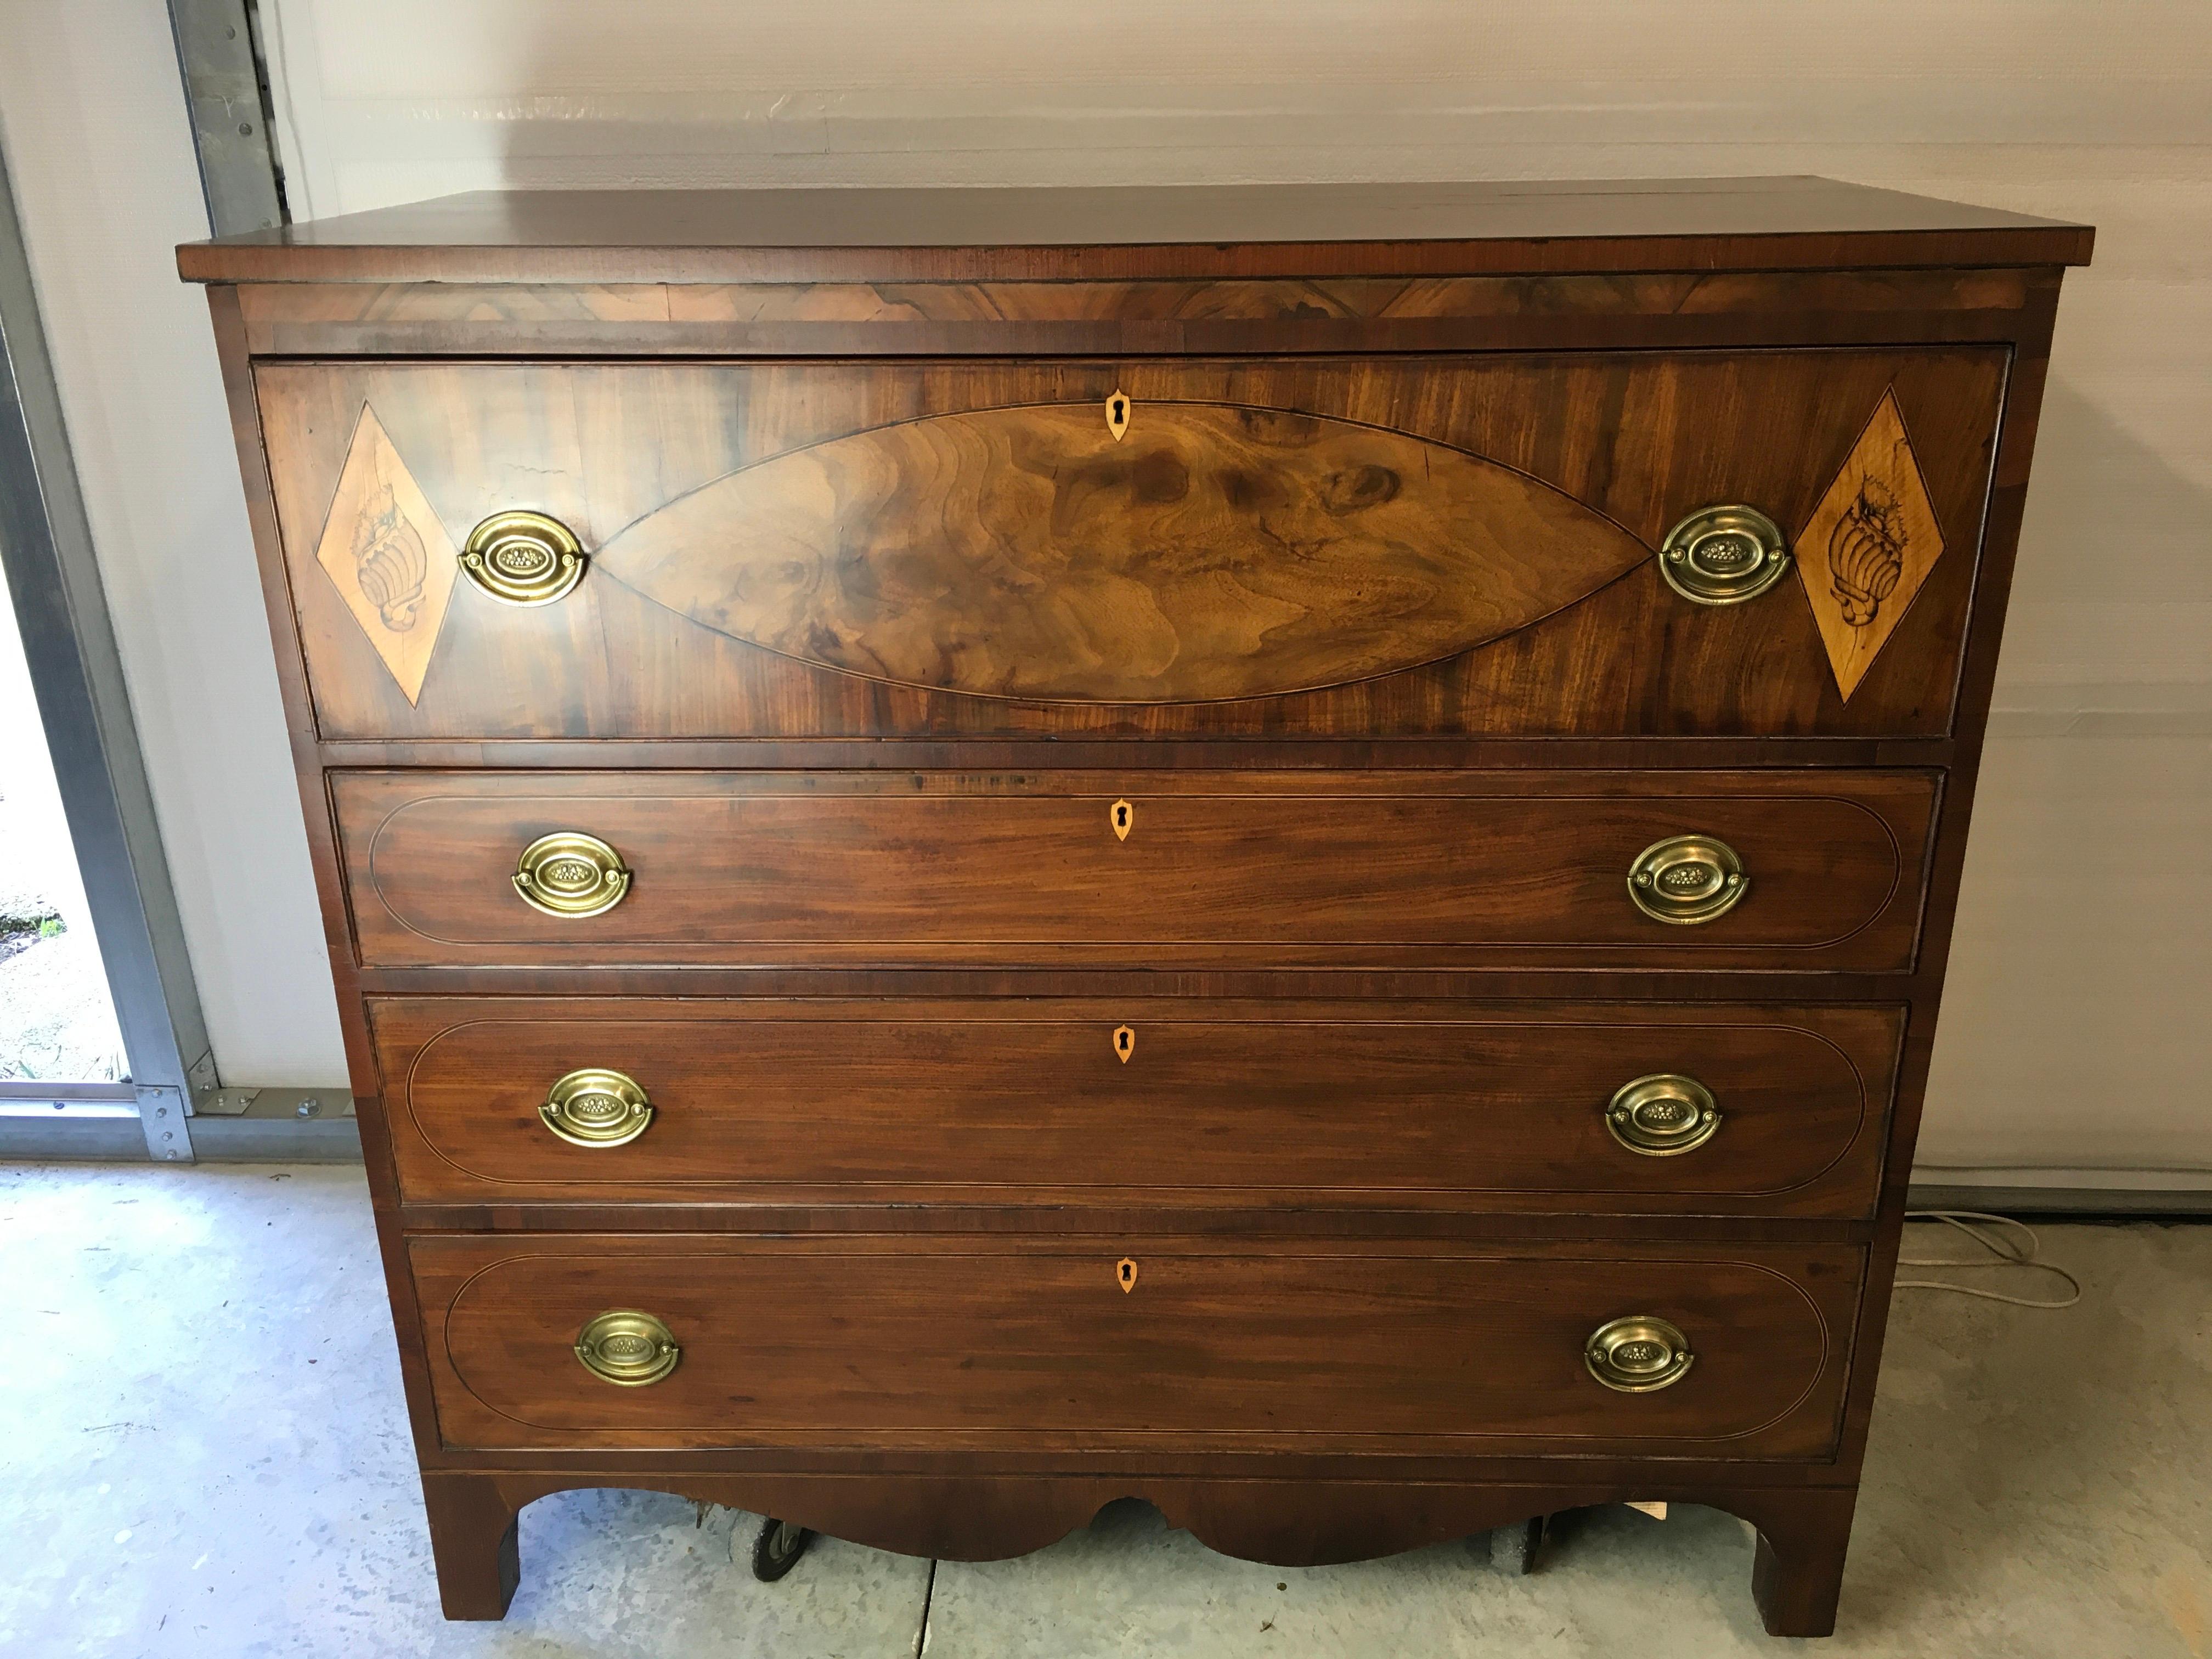 A very nice American Hepplewhite Mahogany chest probably of New England origin around 1800-1820. This piece has beautiful oval string inlay banding around the drawer fronts and a large figured Mahogany oval veneer inlay on the large top drawer